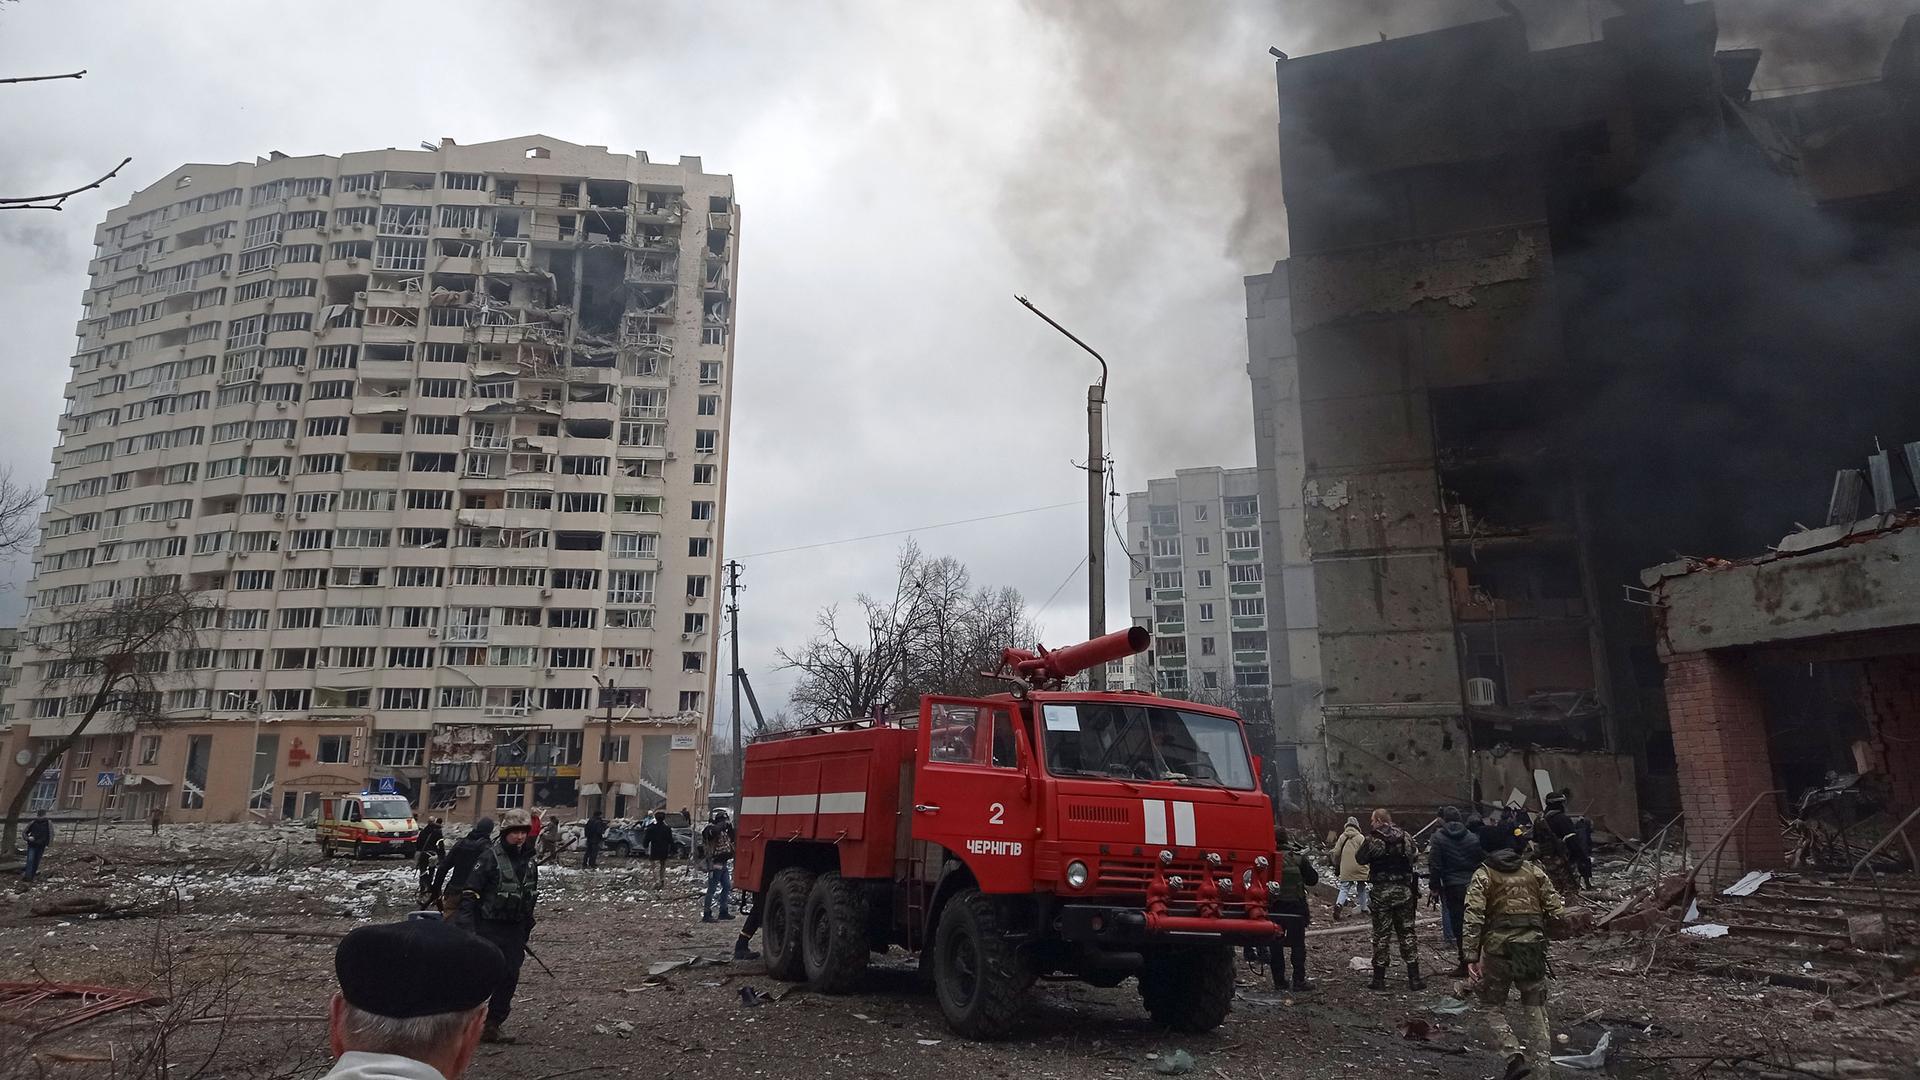 Firefighters work to extinguish a fire at a damaged city center after Russian air raid in Chernigiv, Ukraine, Thursday, March 3, 2022. 